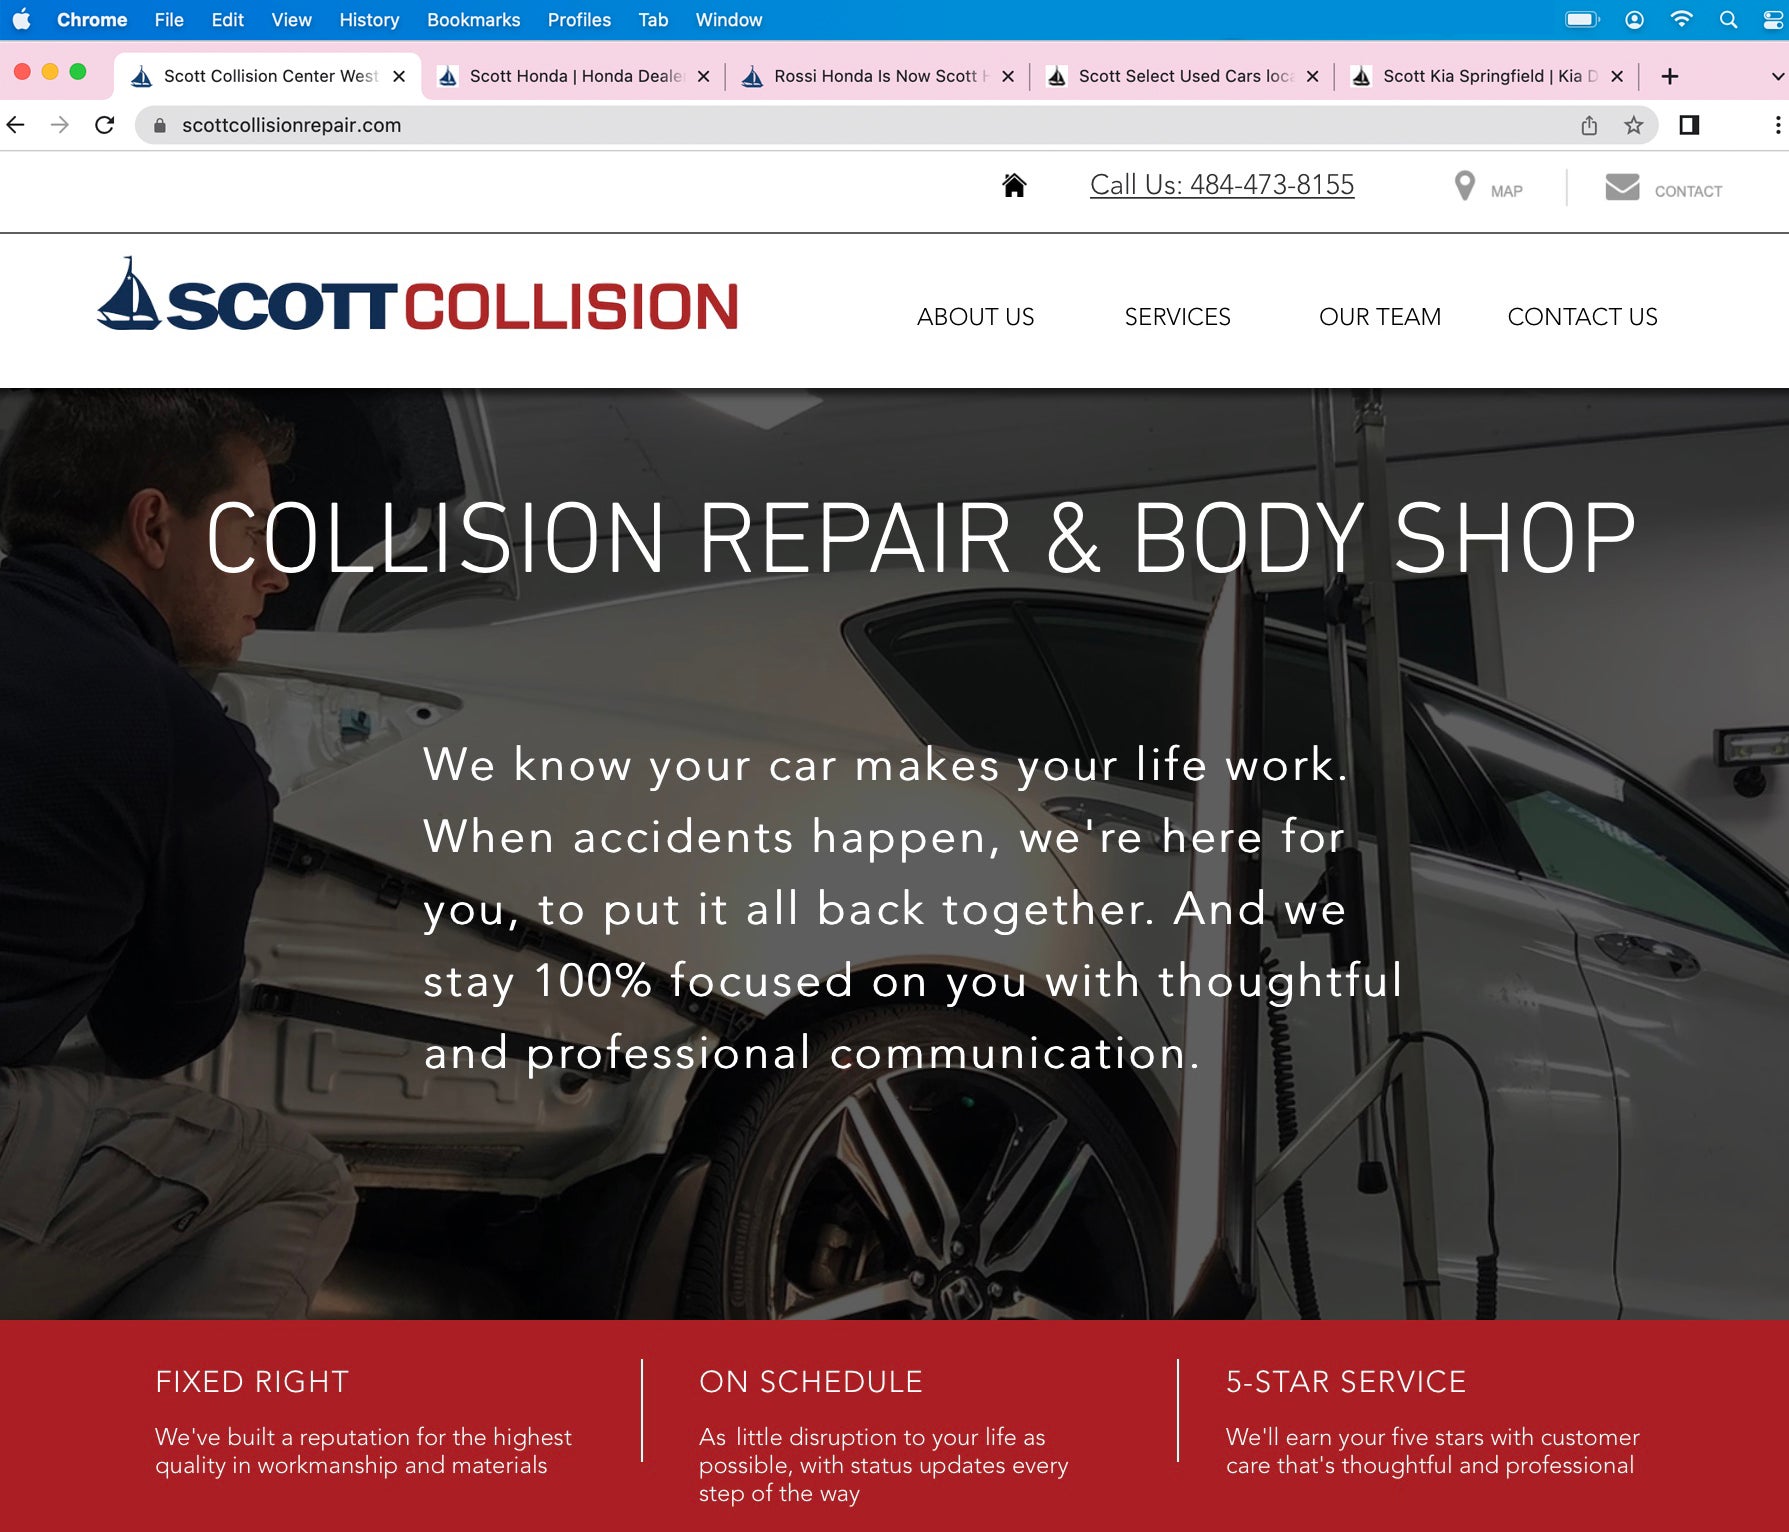 Website for Scott Collision Center West Chester, Grand Opening